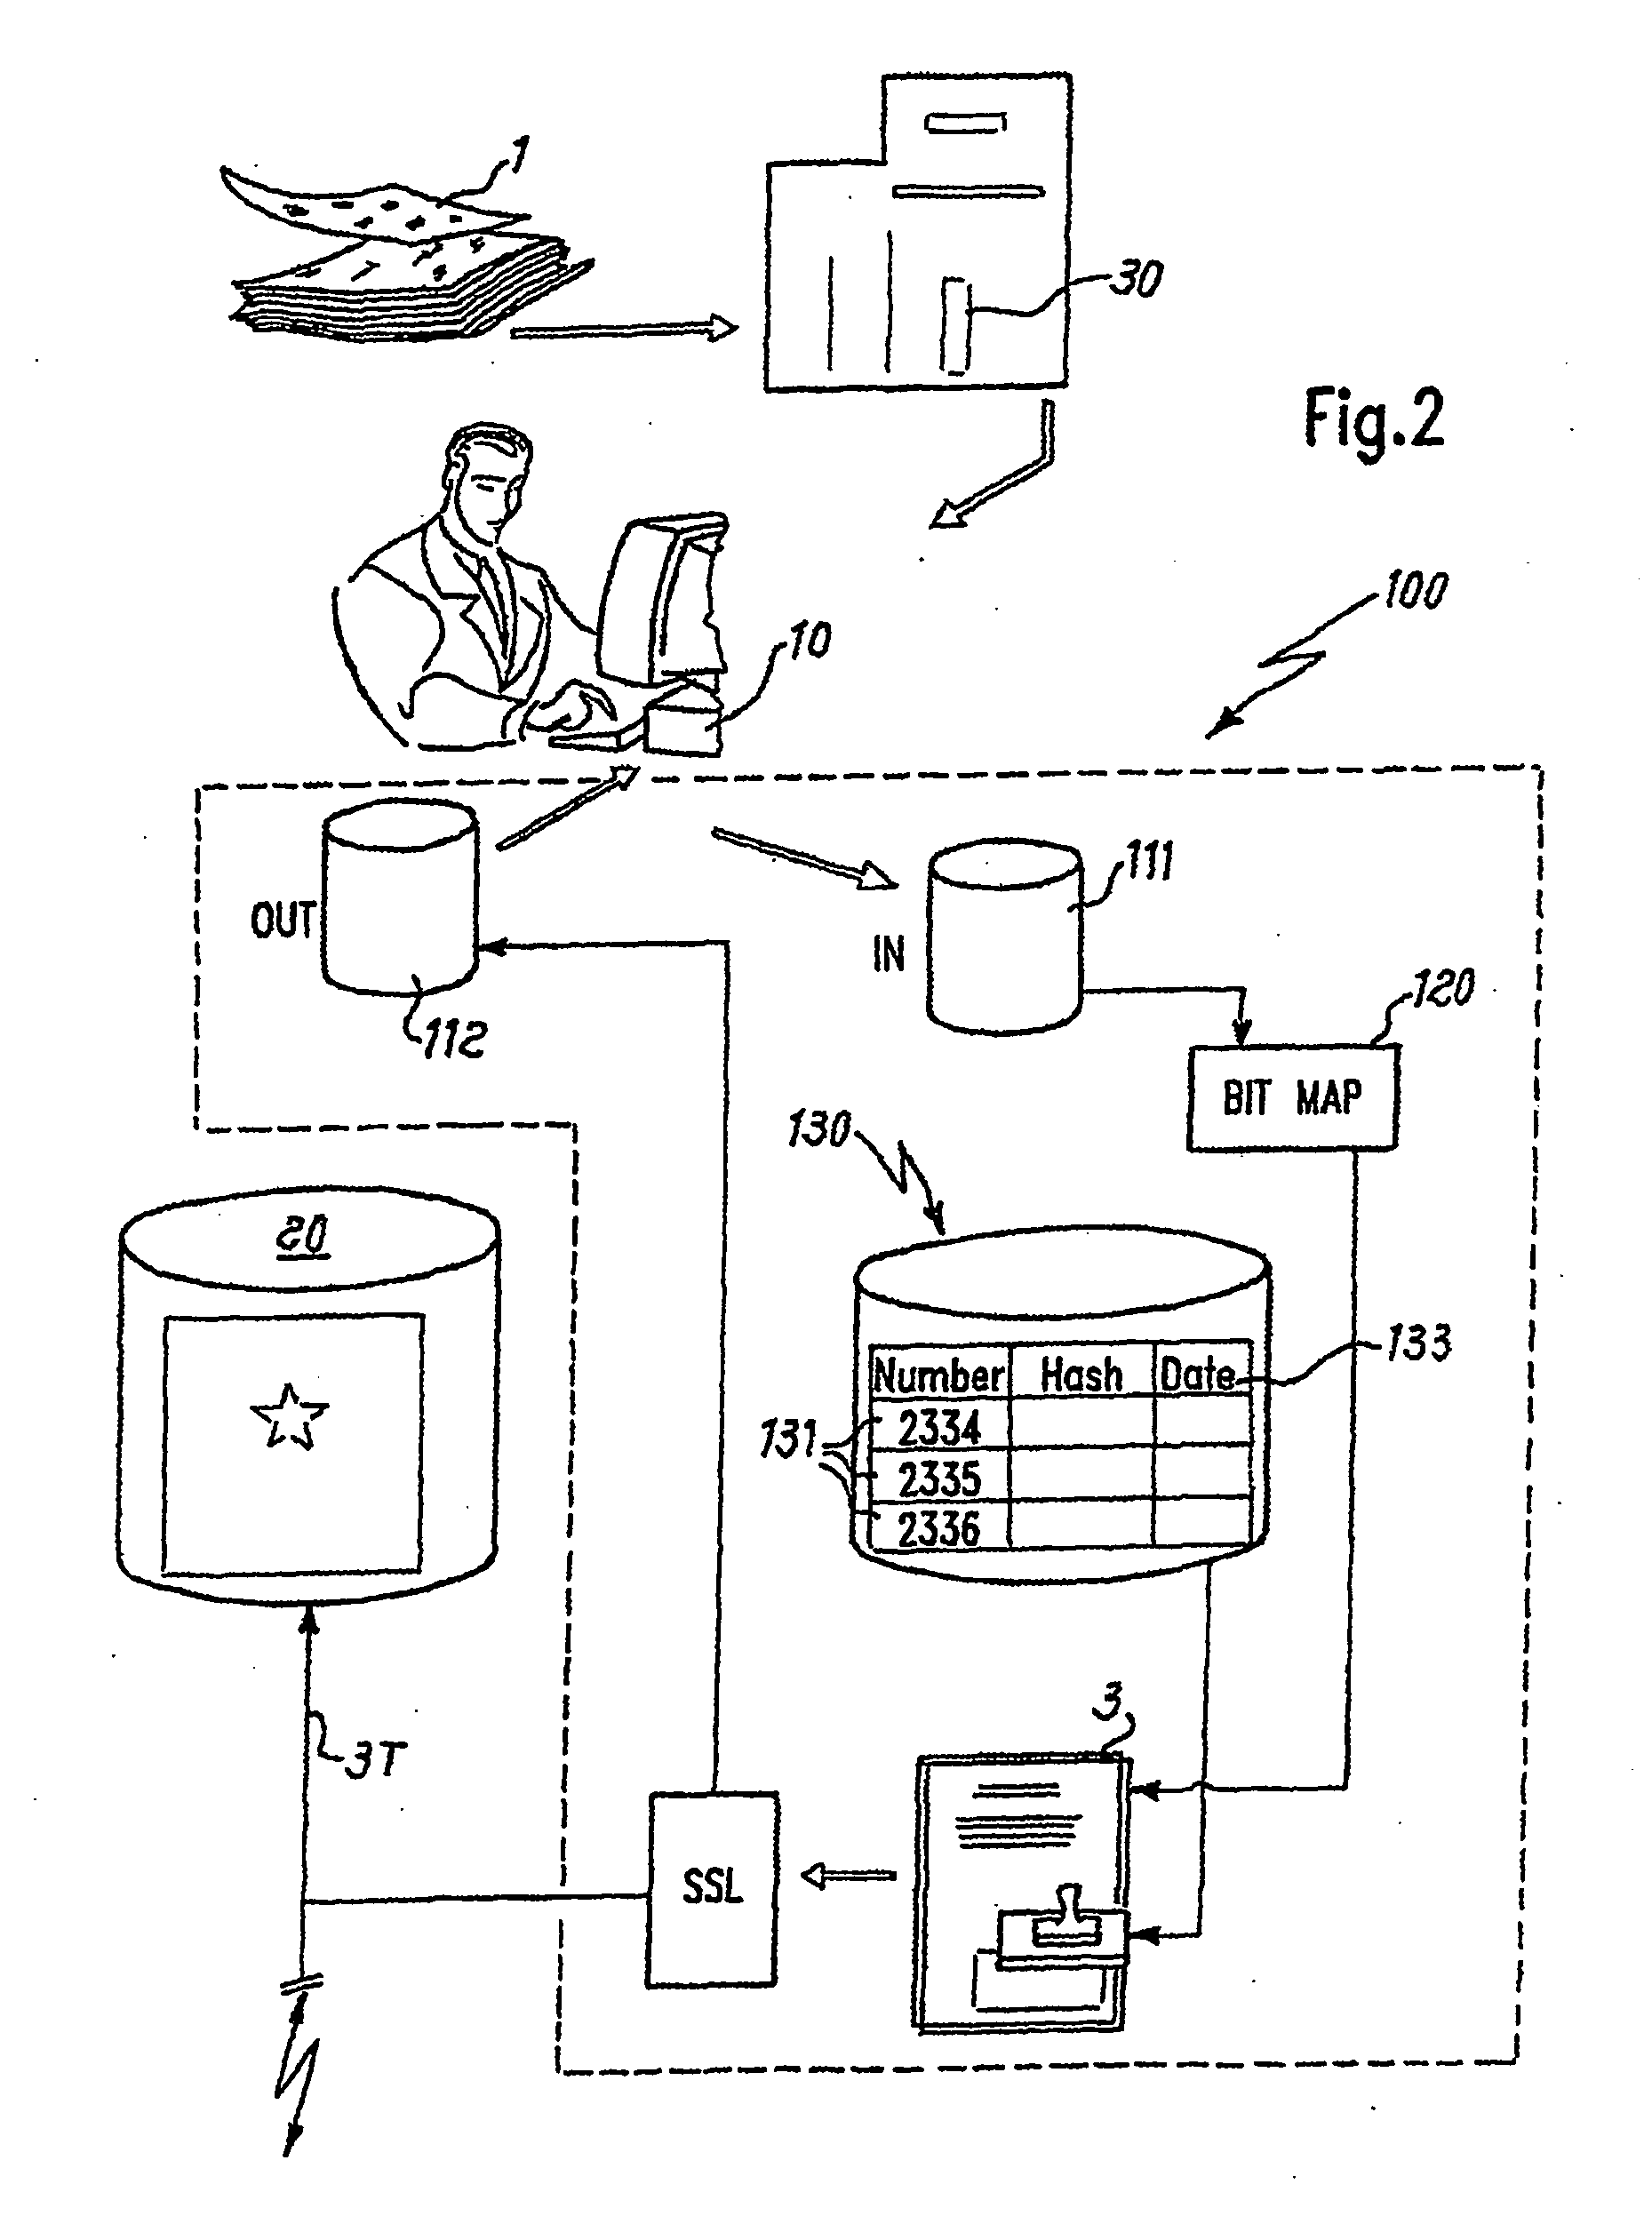 Method and a System for Authenticating and Recording Digital Documents and/or Files